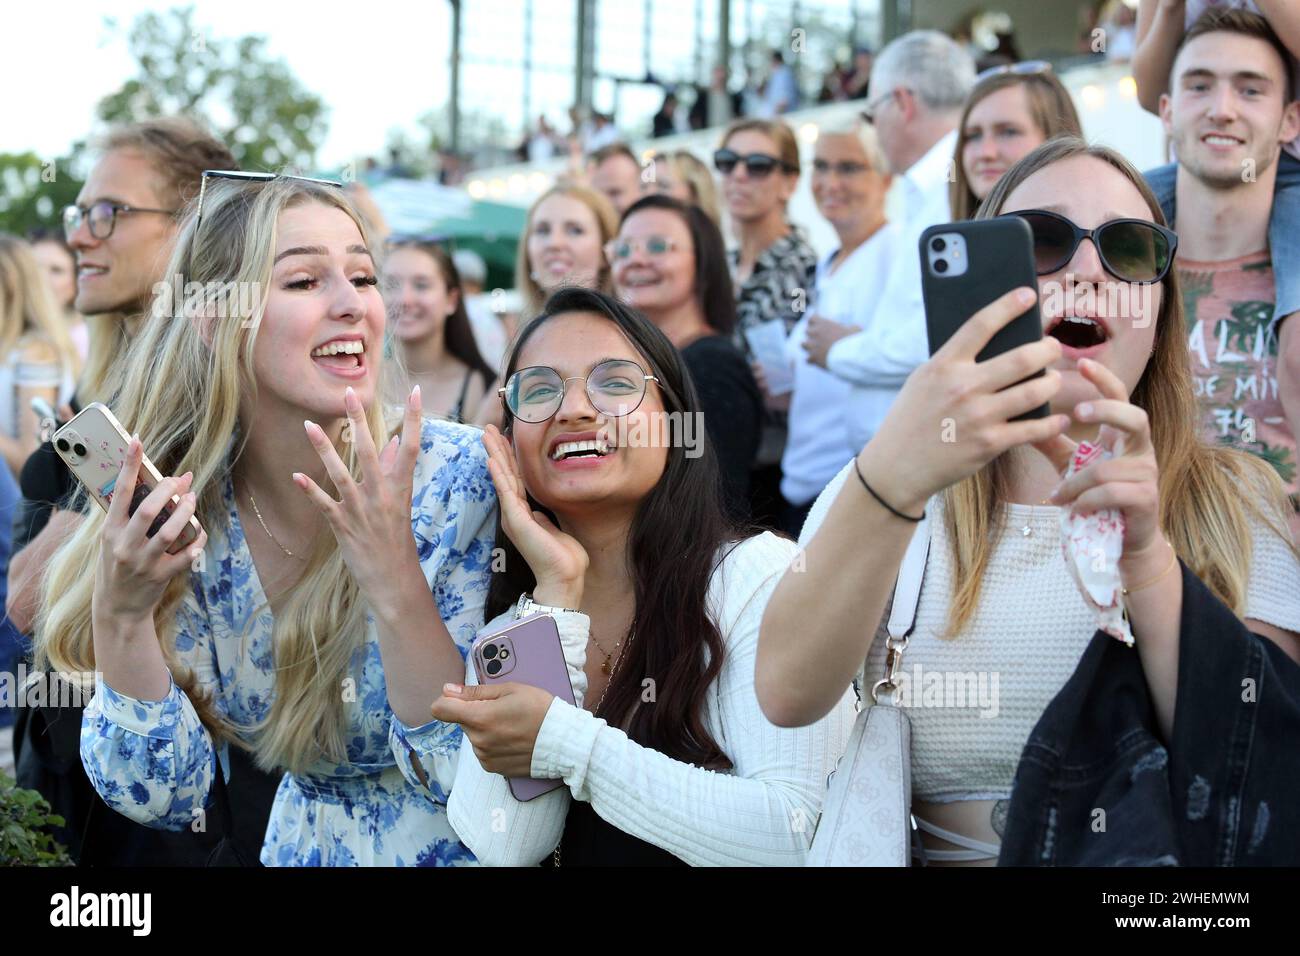 '06.07.2023, Germany, Saxony, Leipzig - Young women cheering on a horse race at the racecourse. 00S230706D081CAROEX.JPG [MODEL RELEASE: NO, PROPERTY R Stock Photo